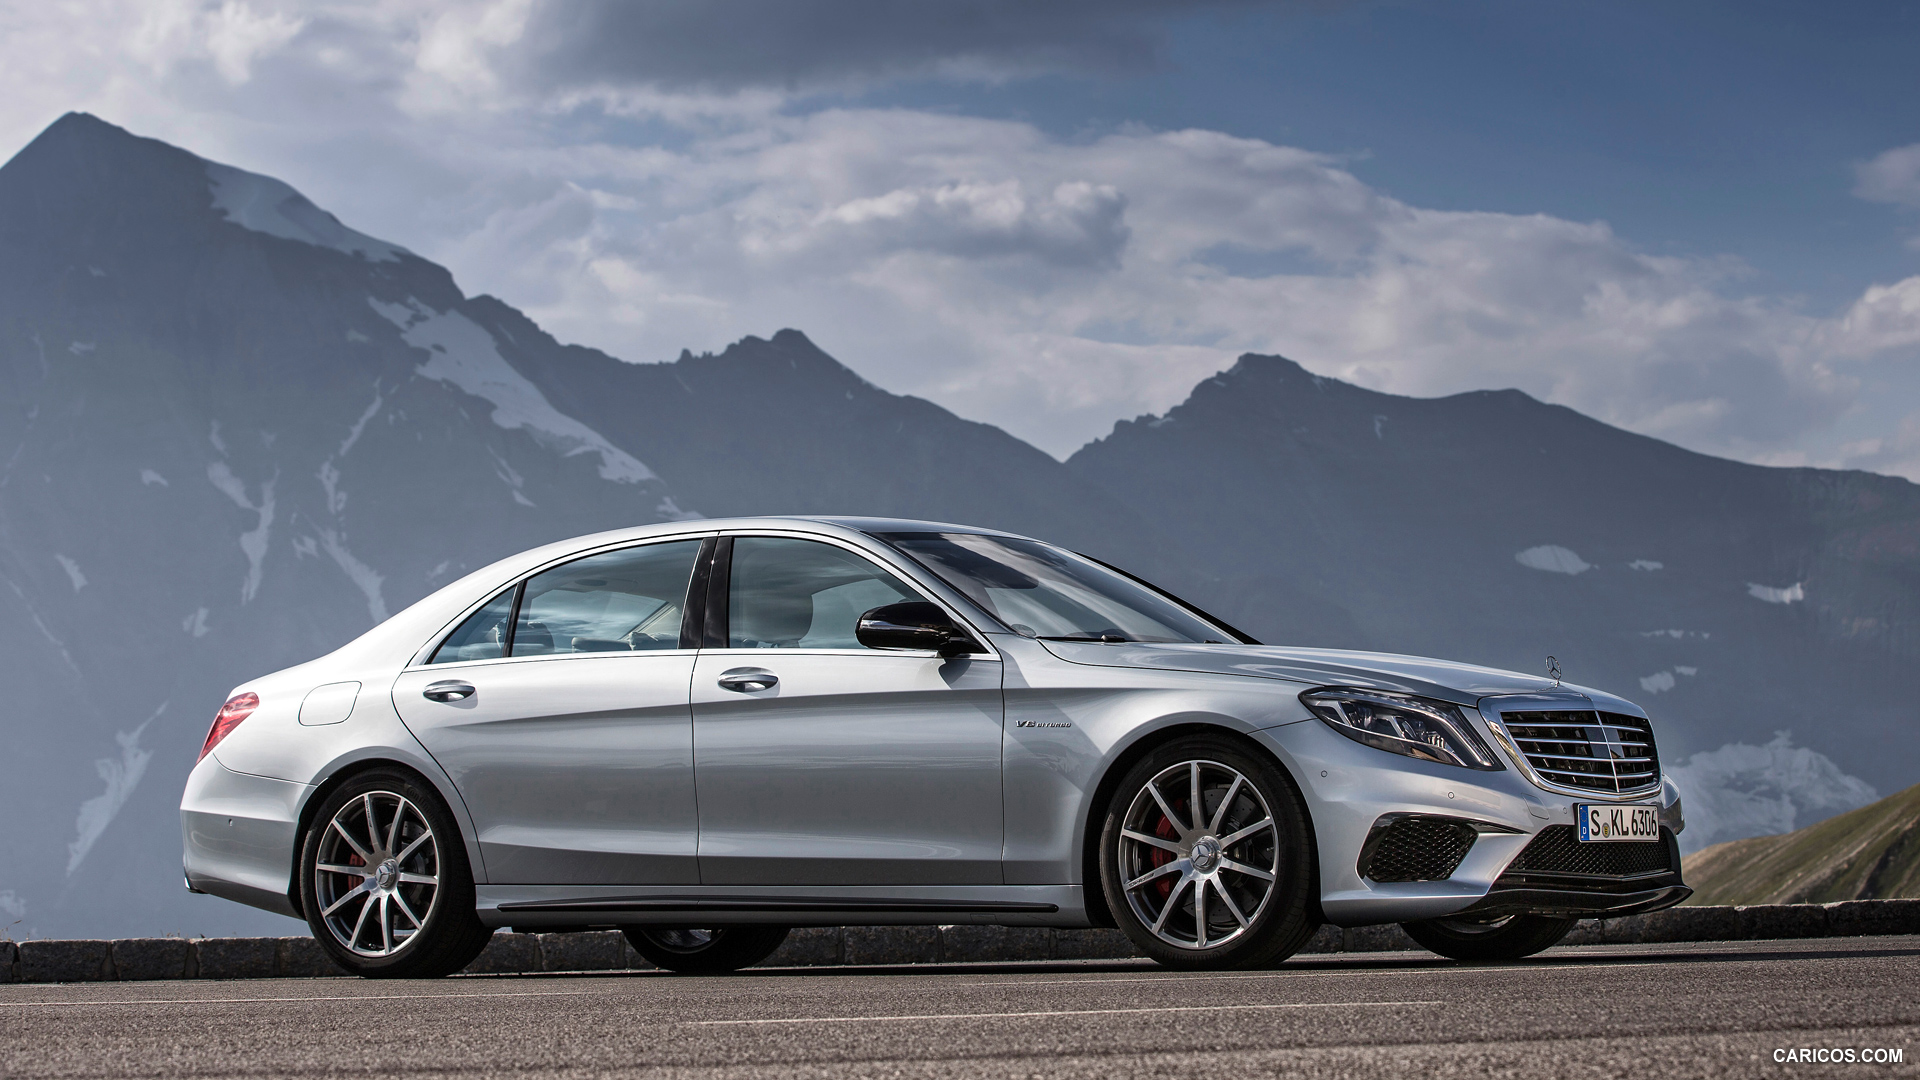 Mercedes-Benz S63 AMG W222 (2014)  - Side, #14 of 102